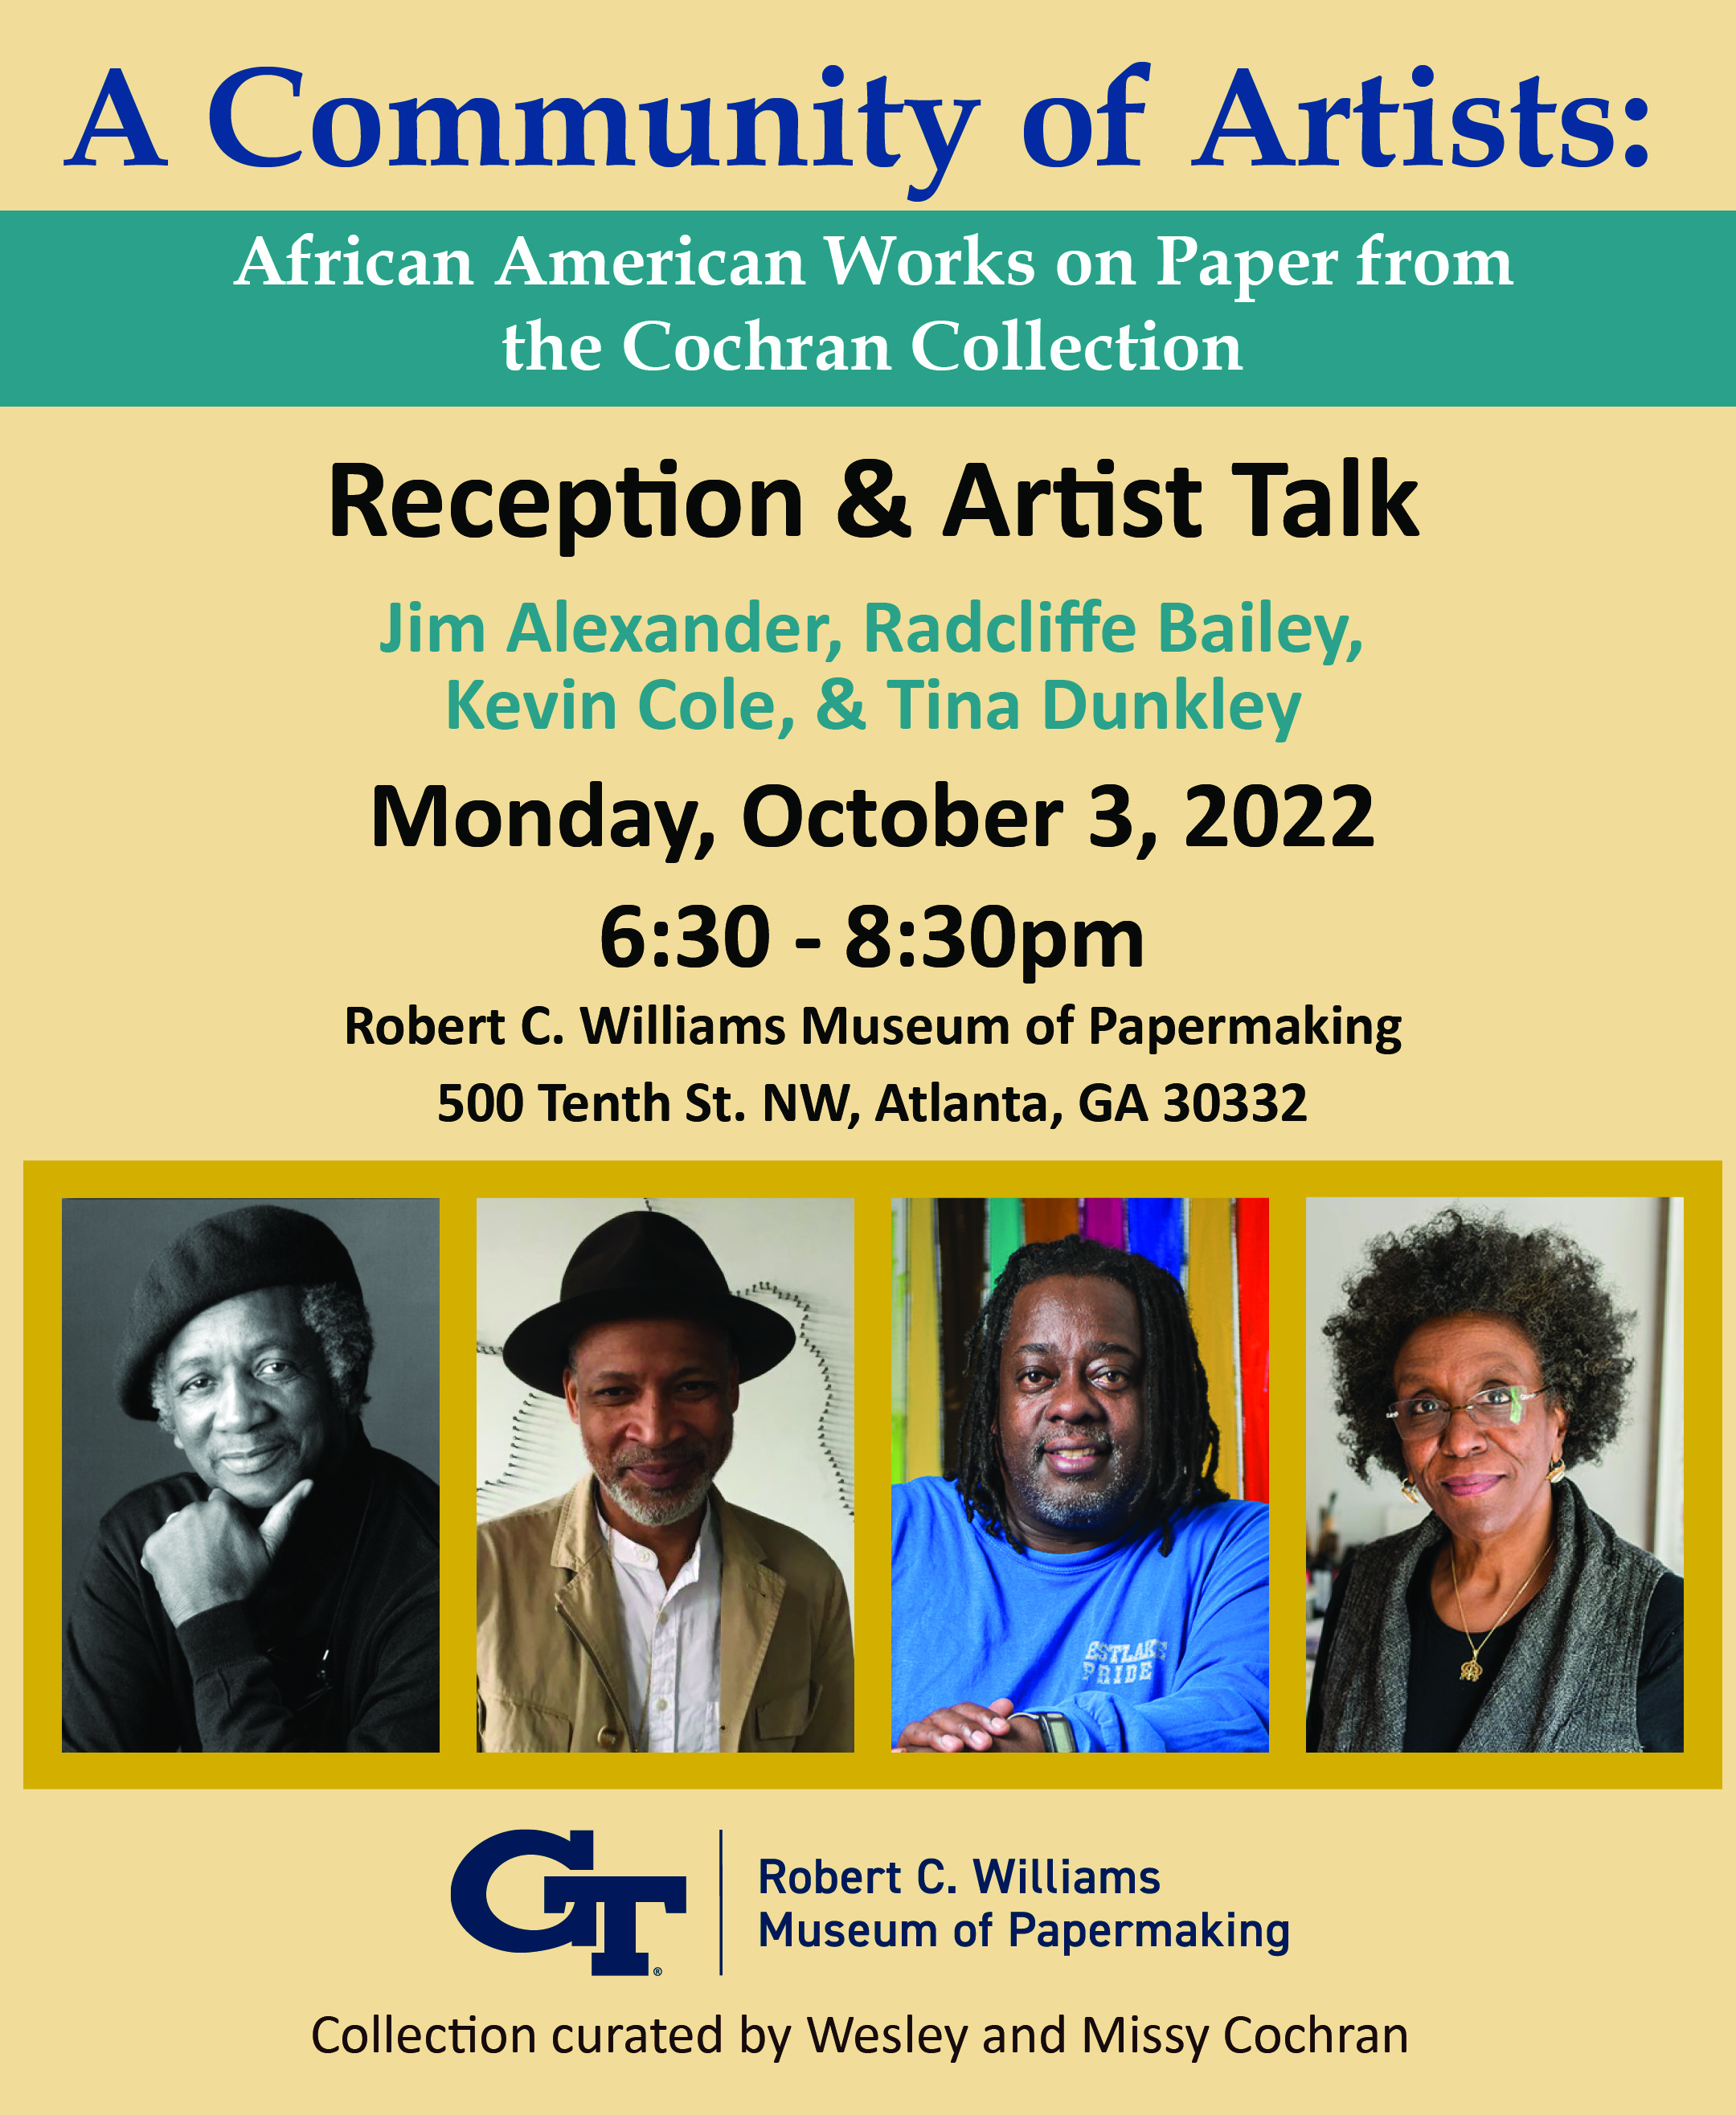 Artist Talk and Reception, Monday, October 3, 2022 6:30p - 8:30p at the Robert C. Williams Museum of Papermaking. Under the announcement are the head shots of the featured artists, Jim Alexander is presented in a black and white photo wearing all black with a black beret, followed by Radcliffe Bailey in a colored photo wearing a black fedora, tan blazer, and white button shirt; then a headshot of Kevin Cole sporting a royal blue t-shirt and chin-length locks; ending with Tina Dunkley with curly salt and pepper hair and glasses 